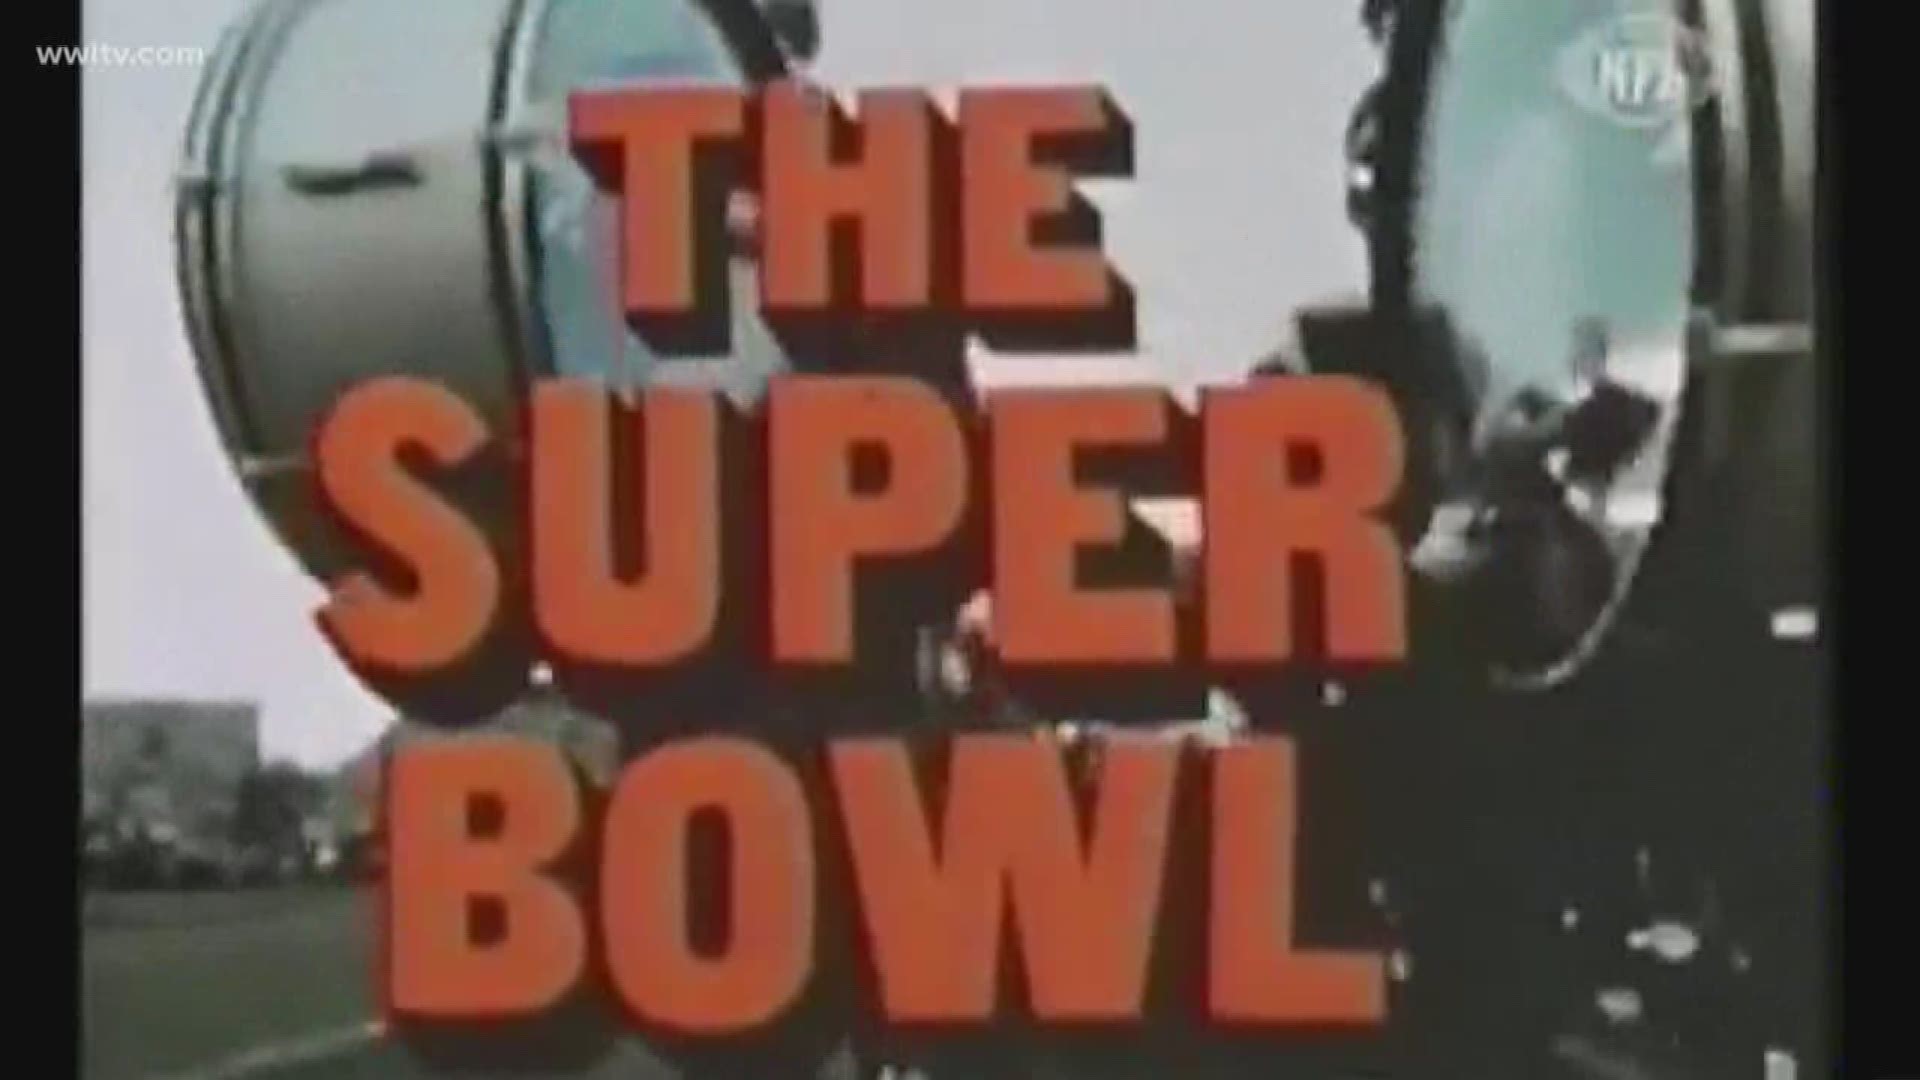 $15 for a Super Bowl ticket? It wasn't as long ago as you'd think.